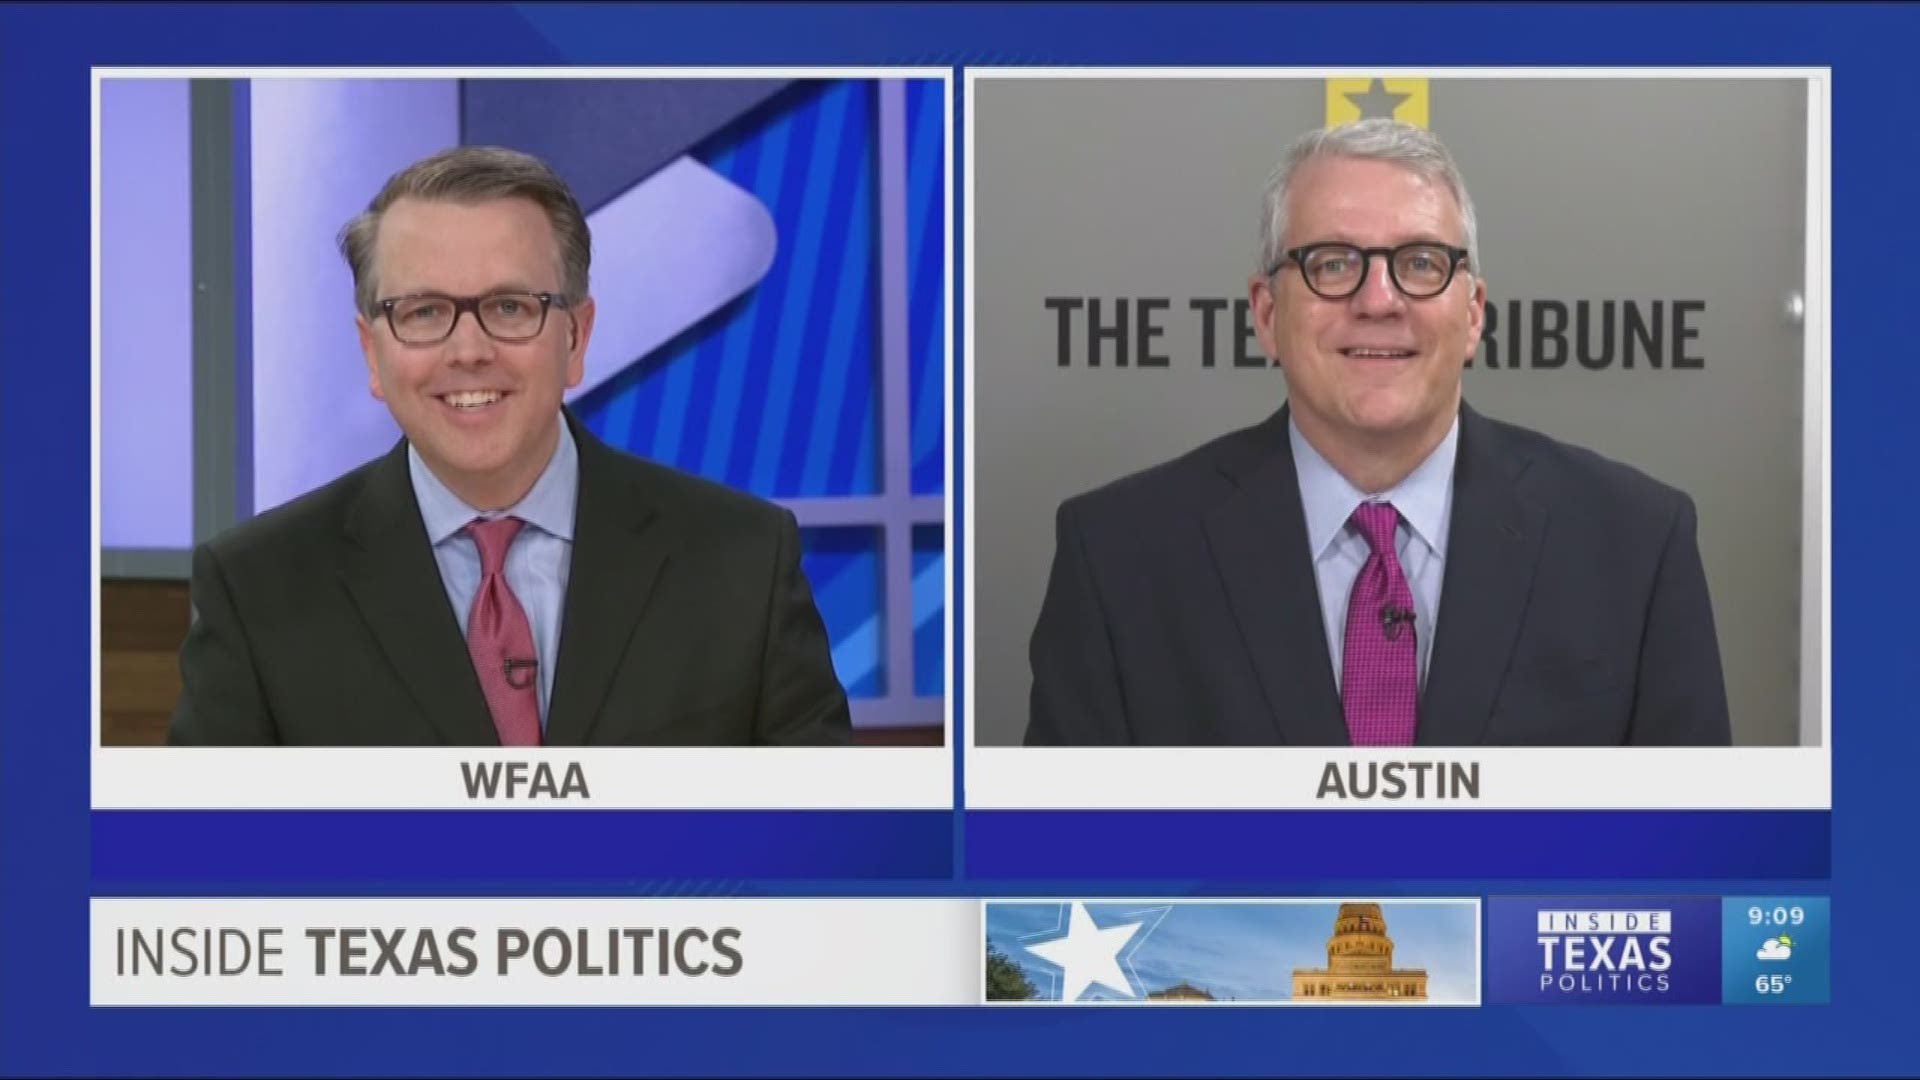 With only five weeks remaining in this 2019 legislative session, Ross Ramsey recently wrote that this is the time when the real work gets done. He also said that up until now, the legislature is just the state's most expensive, exclusive and exasperating drama club. Ross, the co-founder and executive editor of the Texas Tribune, joined host Jason Whitely to give his view on where things stand on priority issues such as reducing property taxes. They also discussed why Democrats did not vote on the 'Born Alive' bill that the Texas House passed.